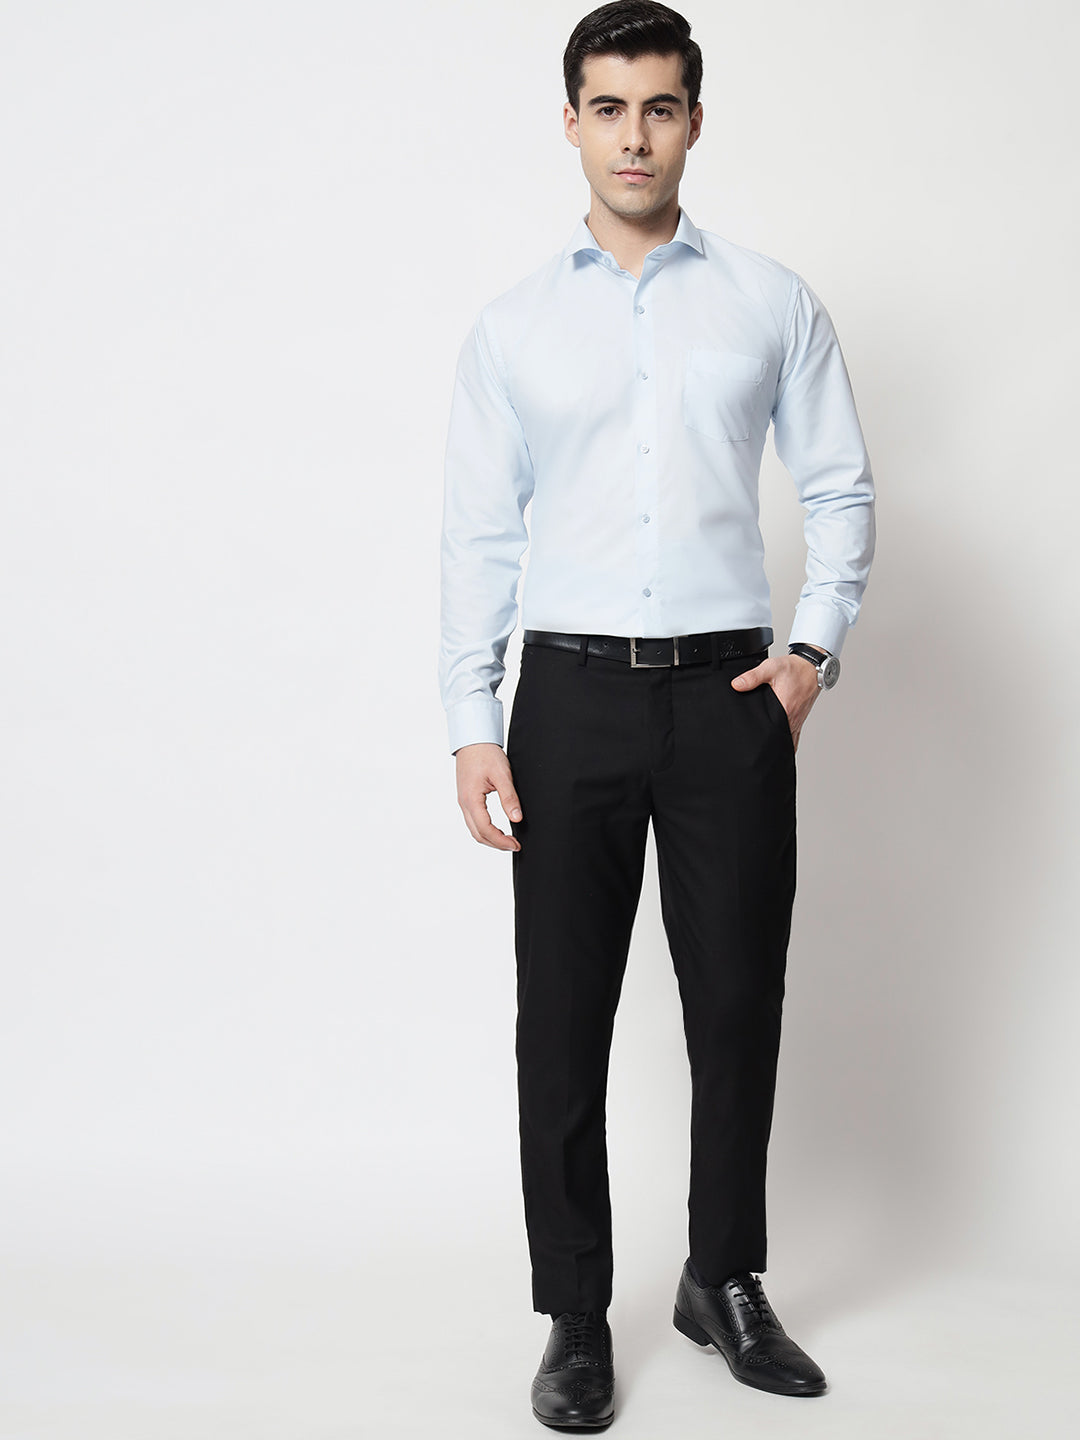 Black and White Shirts Baby Blue Plain Solid Shirt